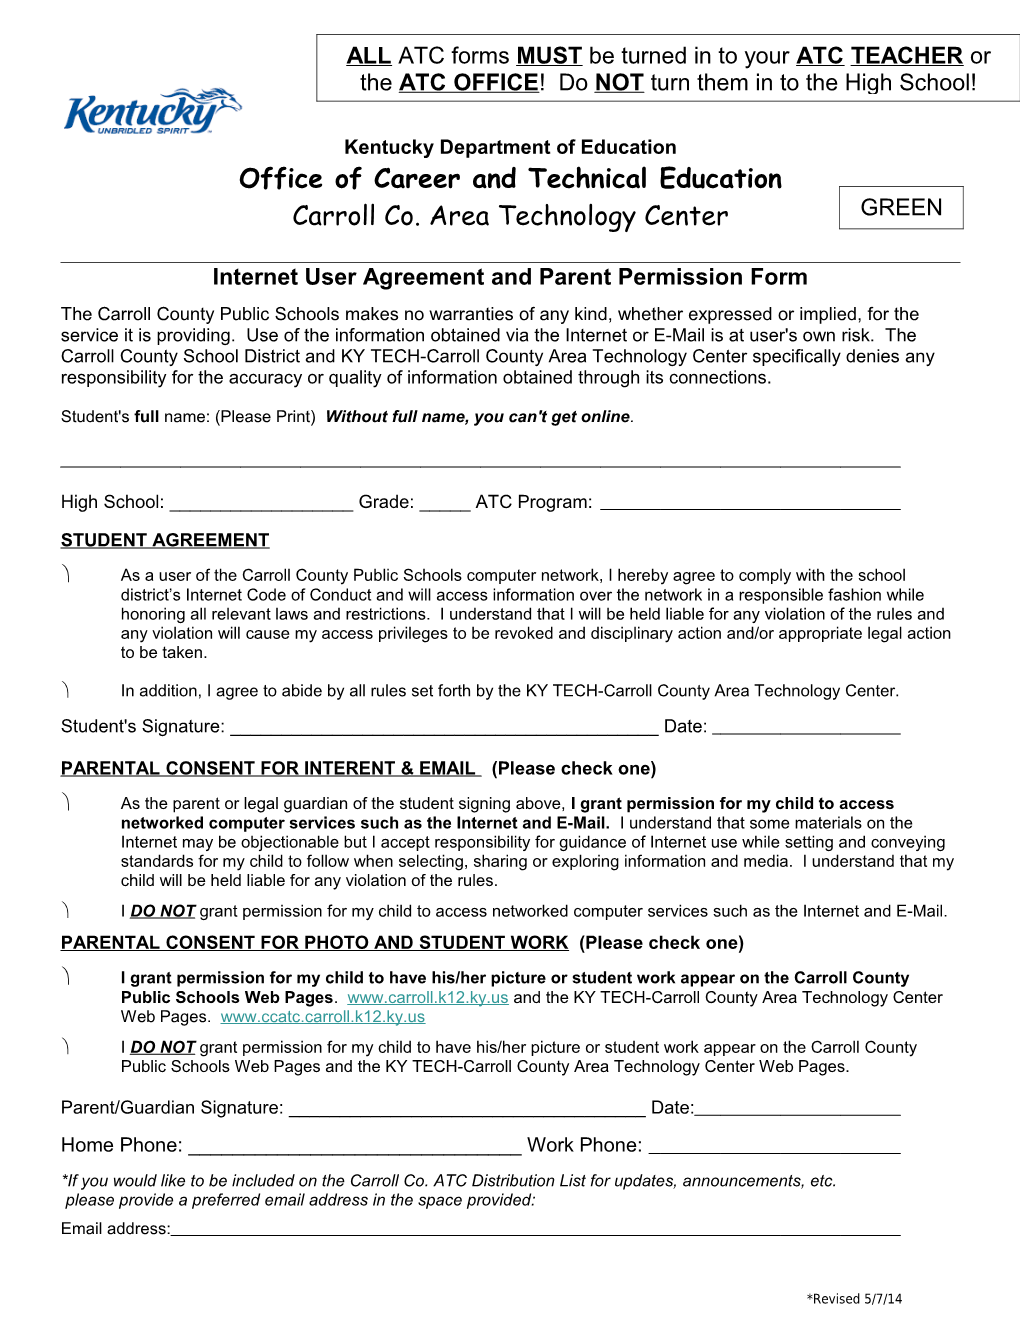 Internet User Agreement and Parent Permission Form